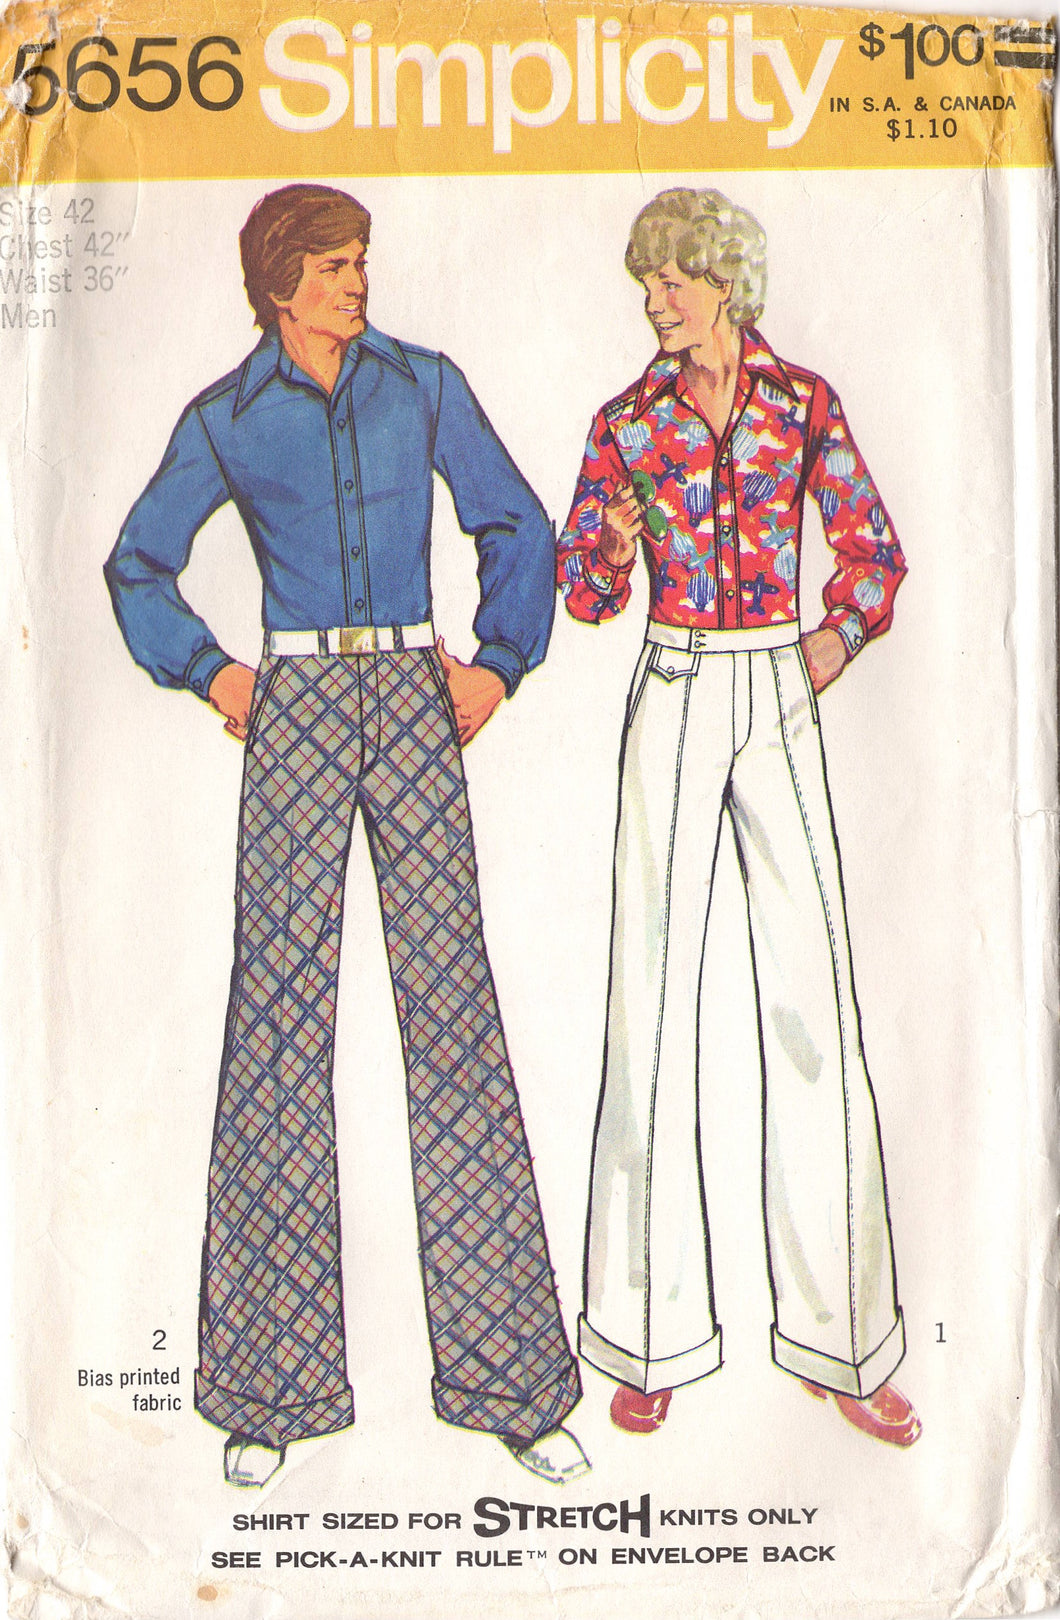 1970's Simplicity Men's Disco outfit, Shirt with large Collar and Bell Bottom Pants - Chest 42